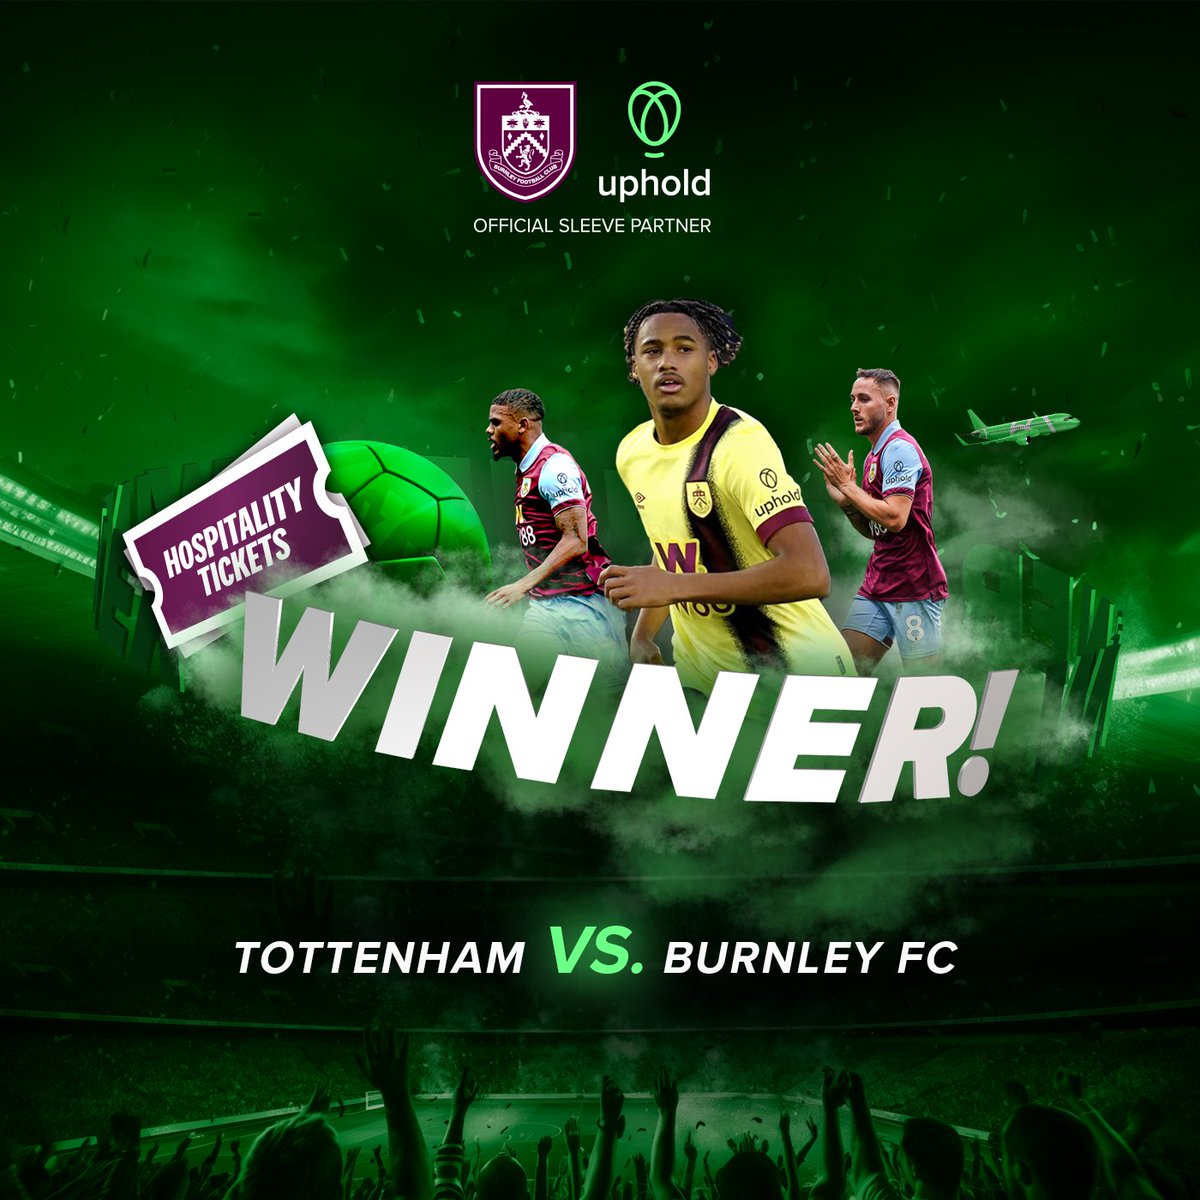 🎉🏆Congratulations to David! 🏆🎉 You’re all set for your London adventure. Two hospitality tickets at @SpursStadium await! Thanks to all that participated. Stay trading, and who knows? The next adventure we announce could be yours! #TottenhamvsBurnleyFC #TOTBUR #Uphold